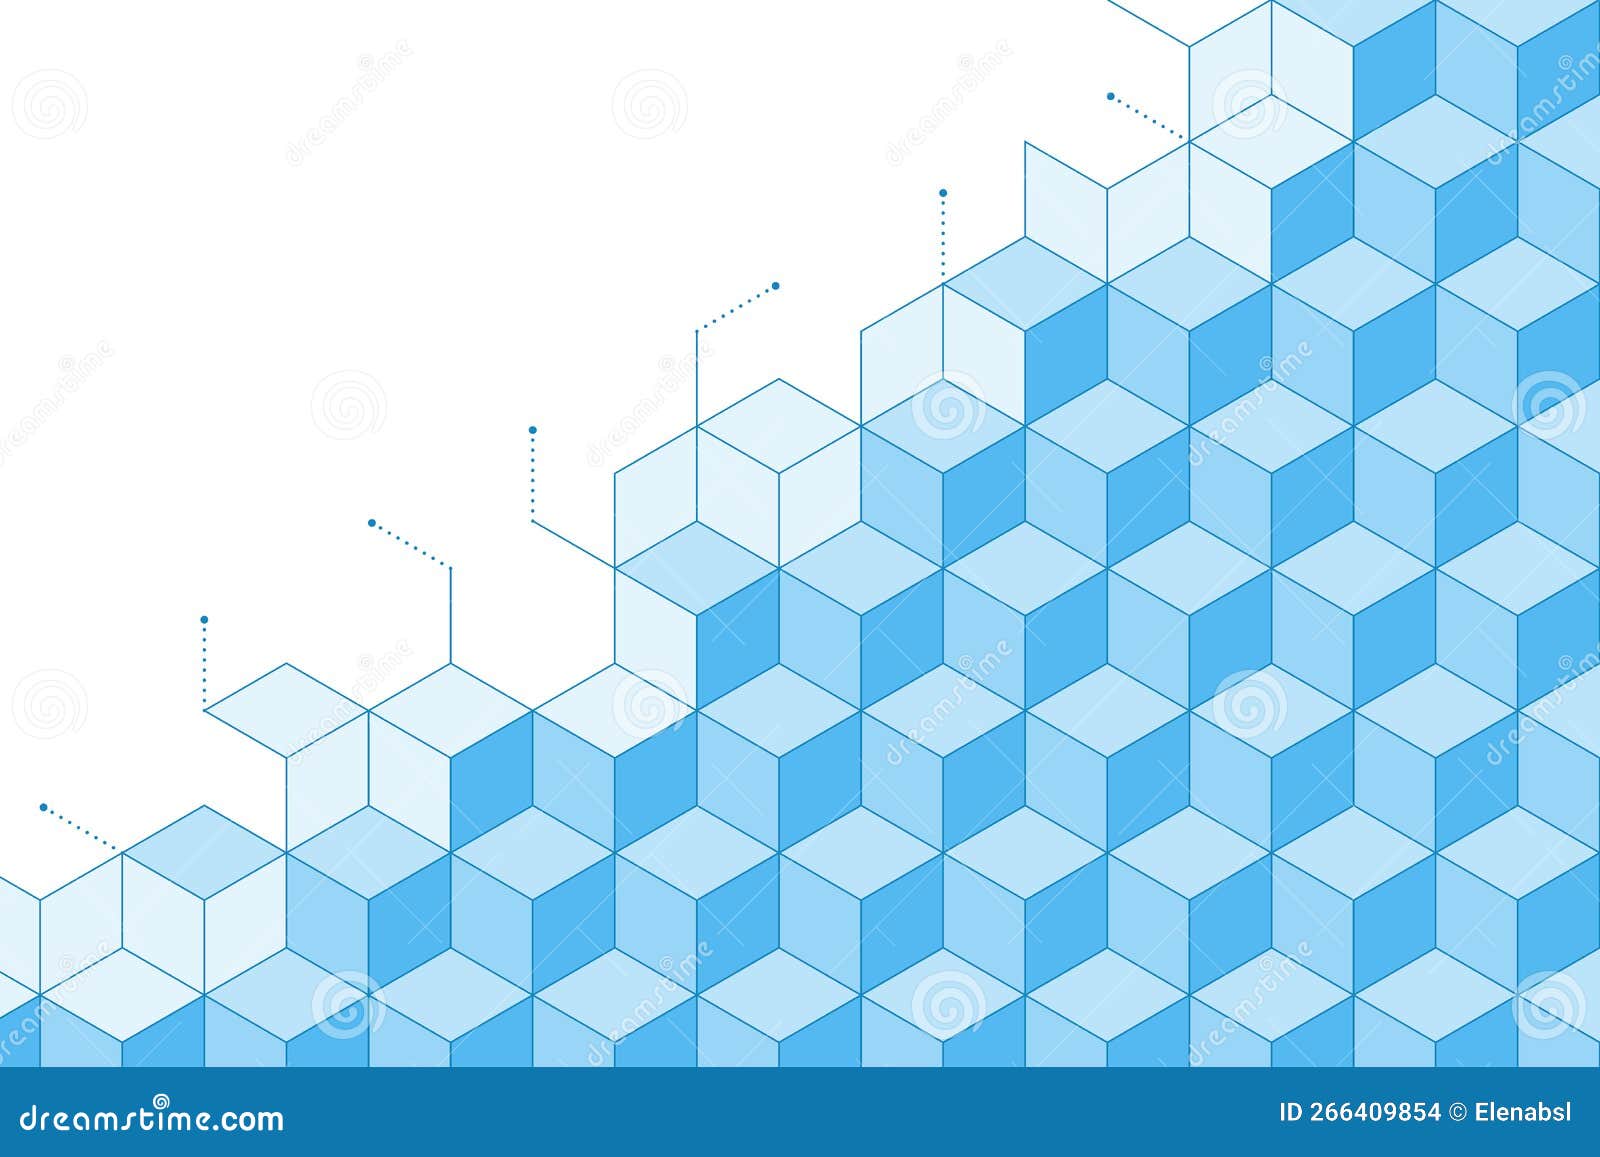 tridimensional blocks pattern background with copy space